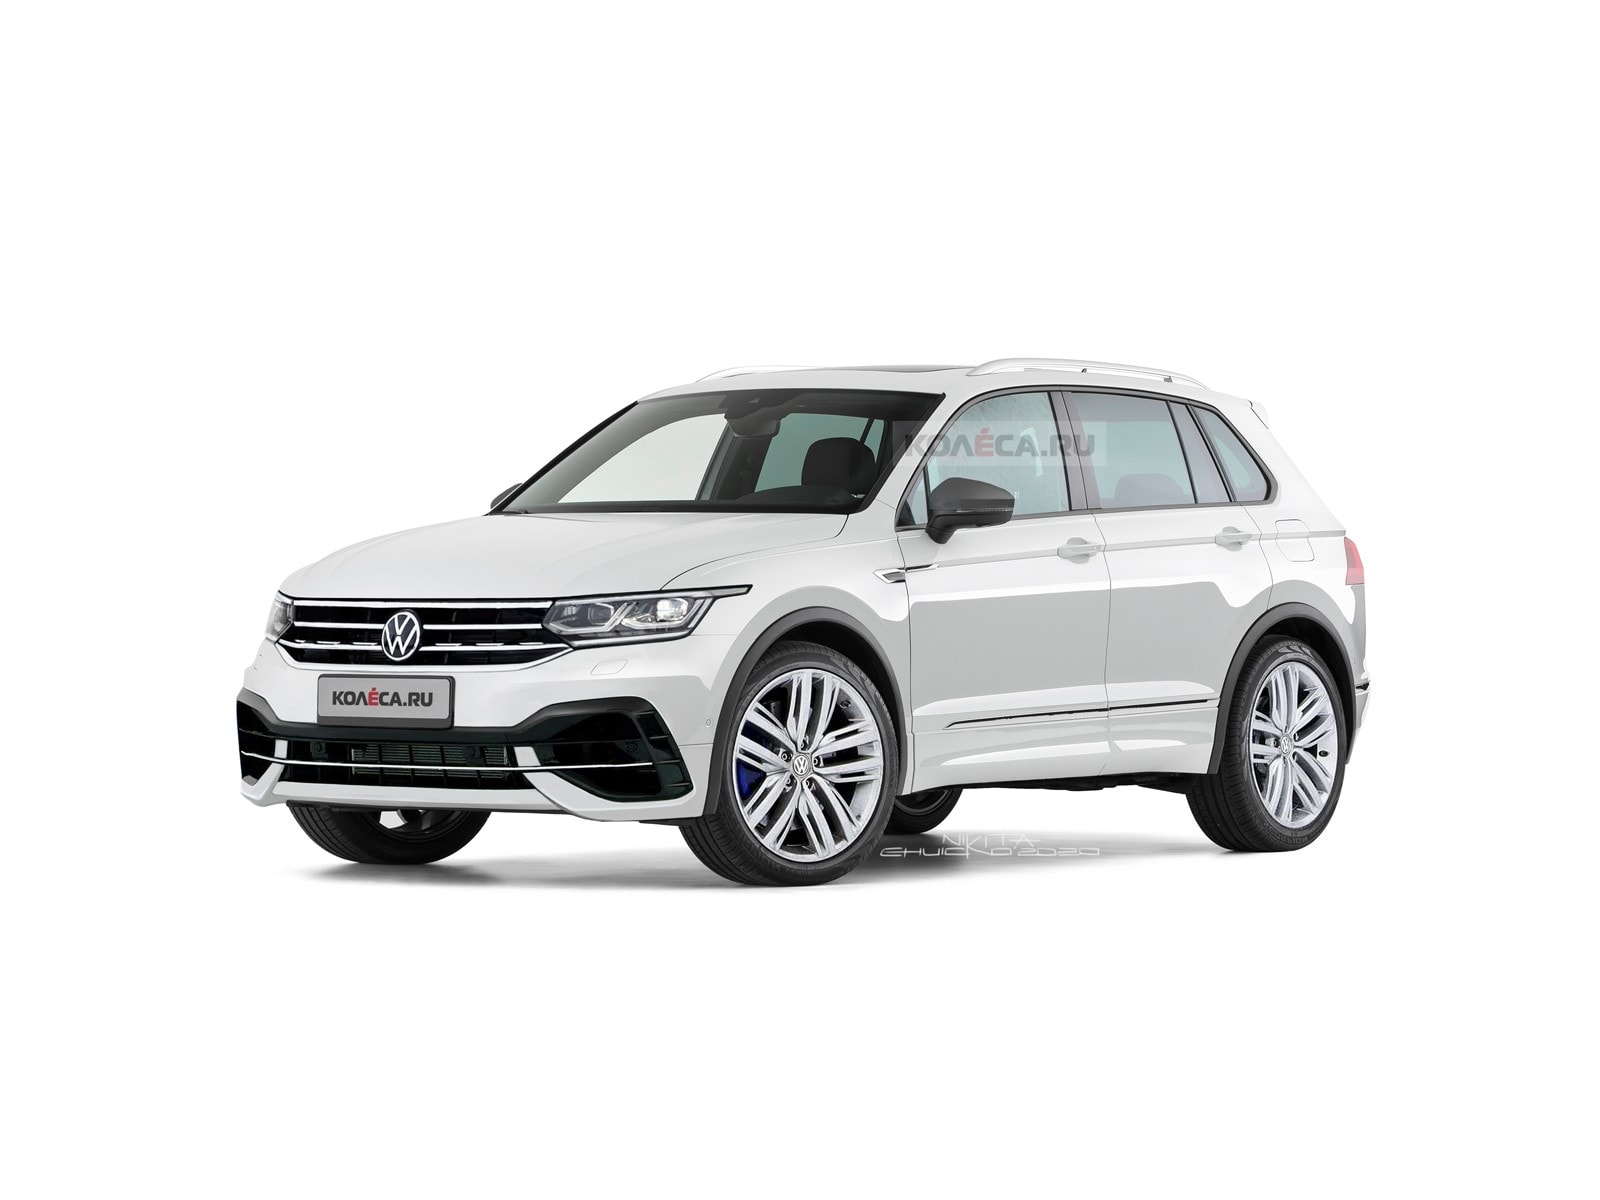 2021 Volkswagen Tiguan R Accurately Rendered, Will Have ...